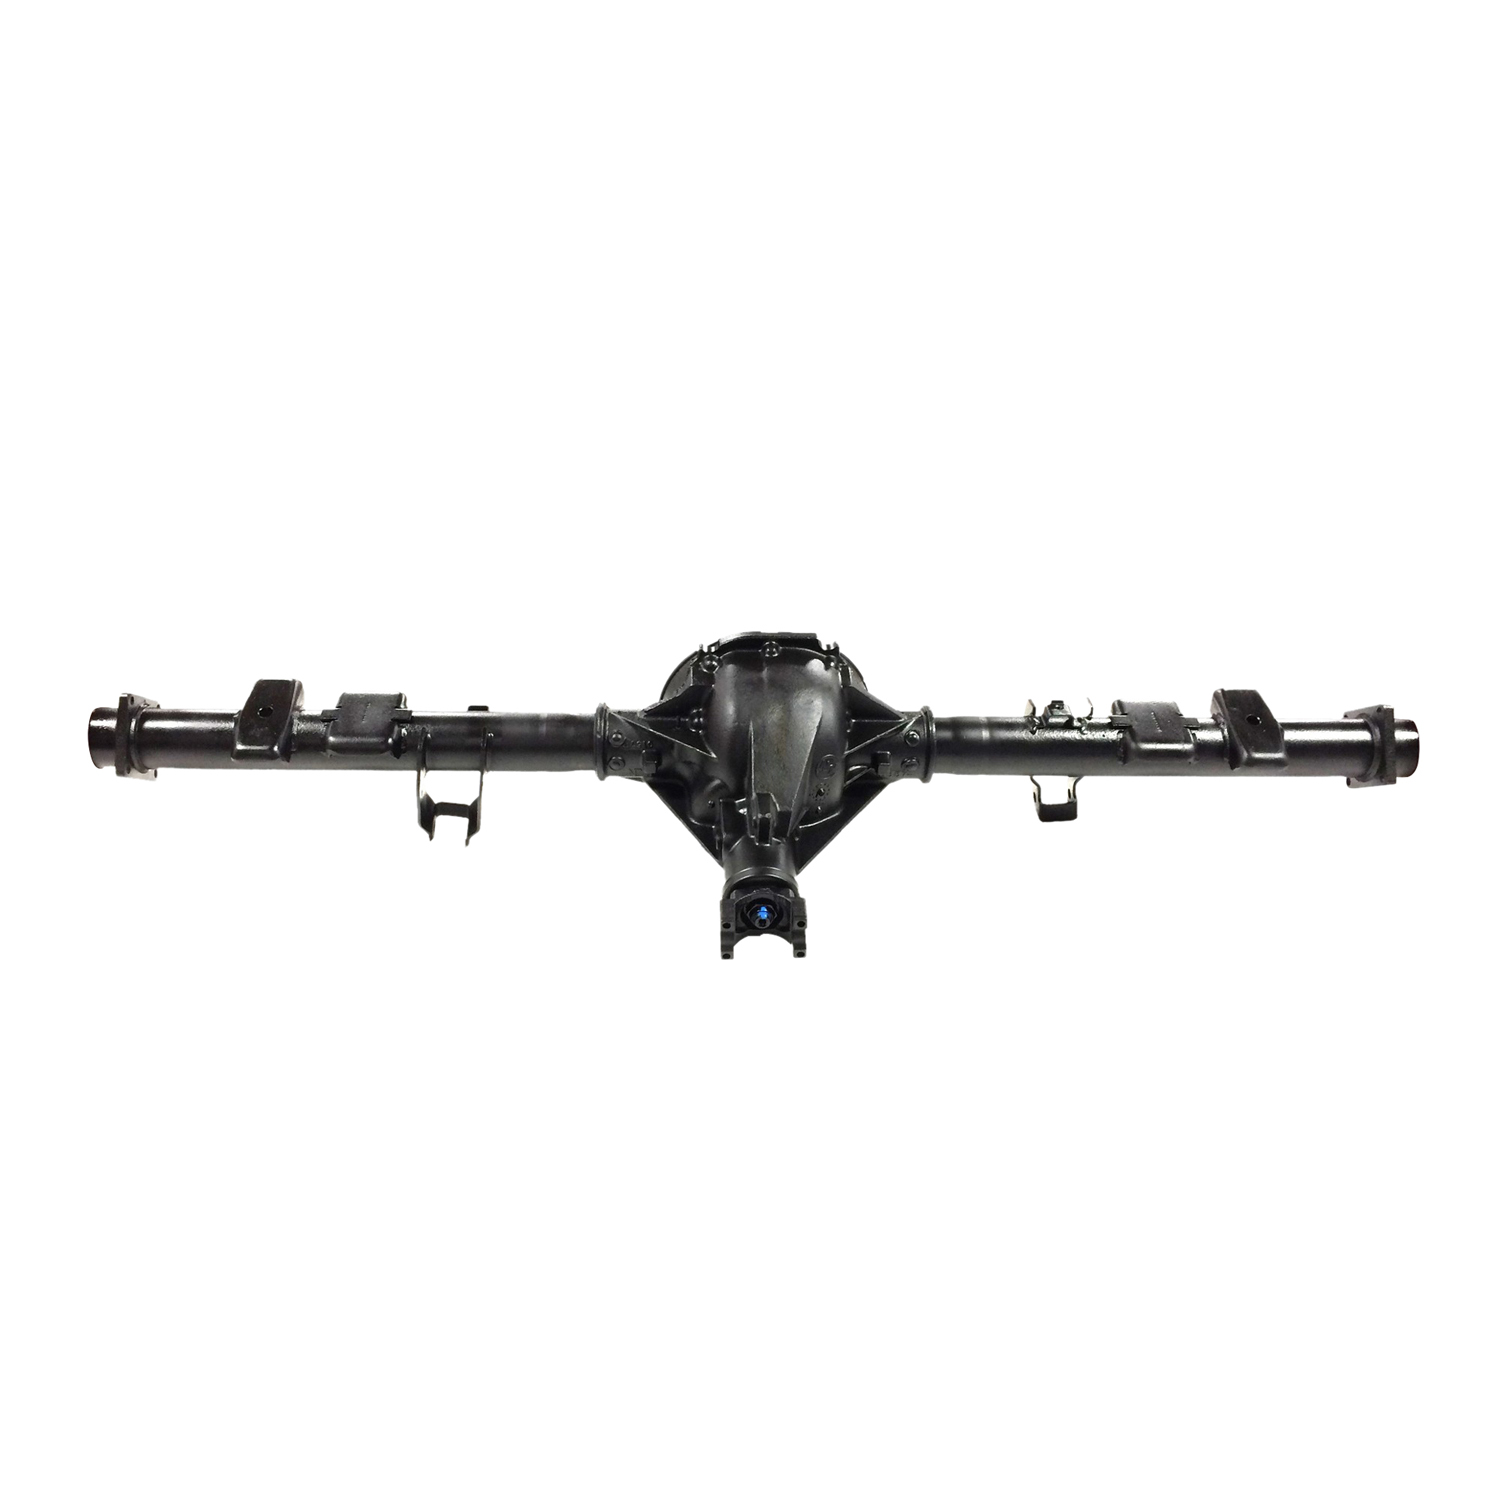 Reman Axle Assembly for GM 8.5" 1988-95 GM Van 1500 And 2500, 3.42 Ratio, Open